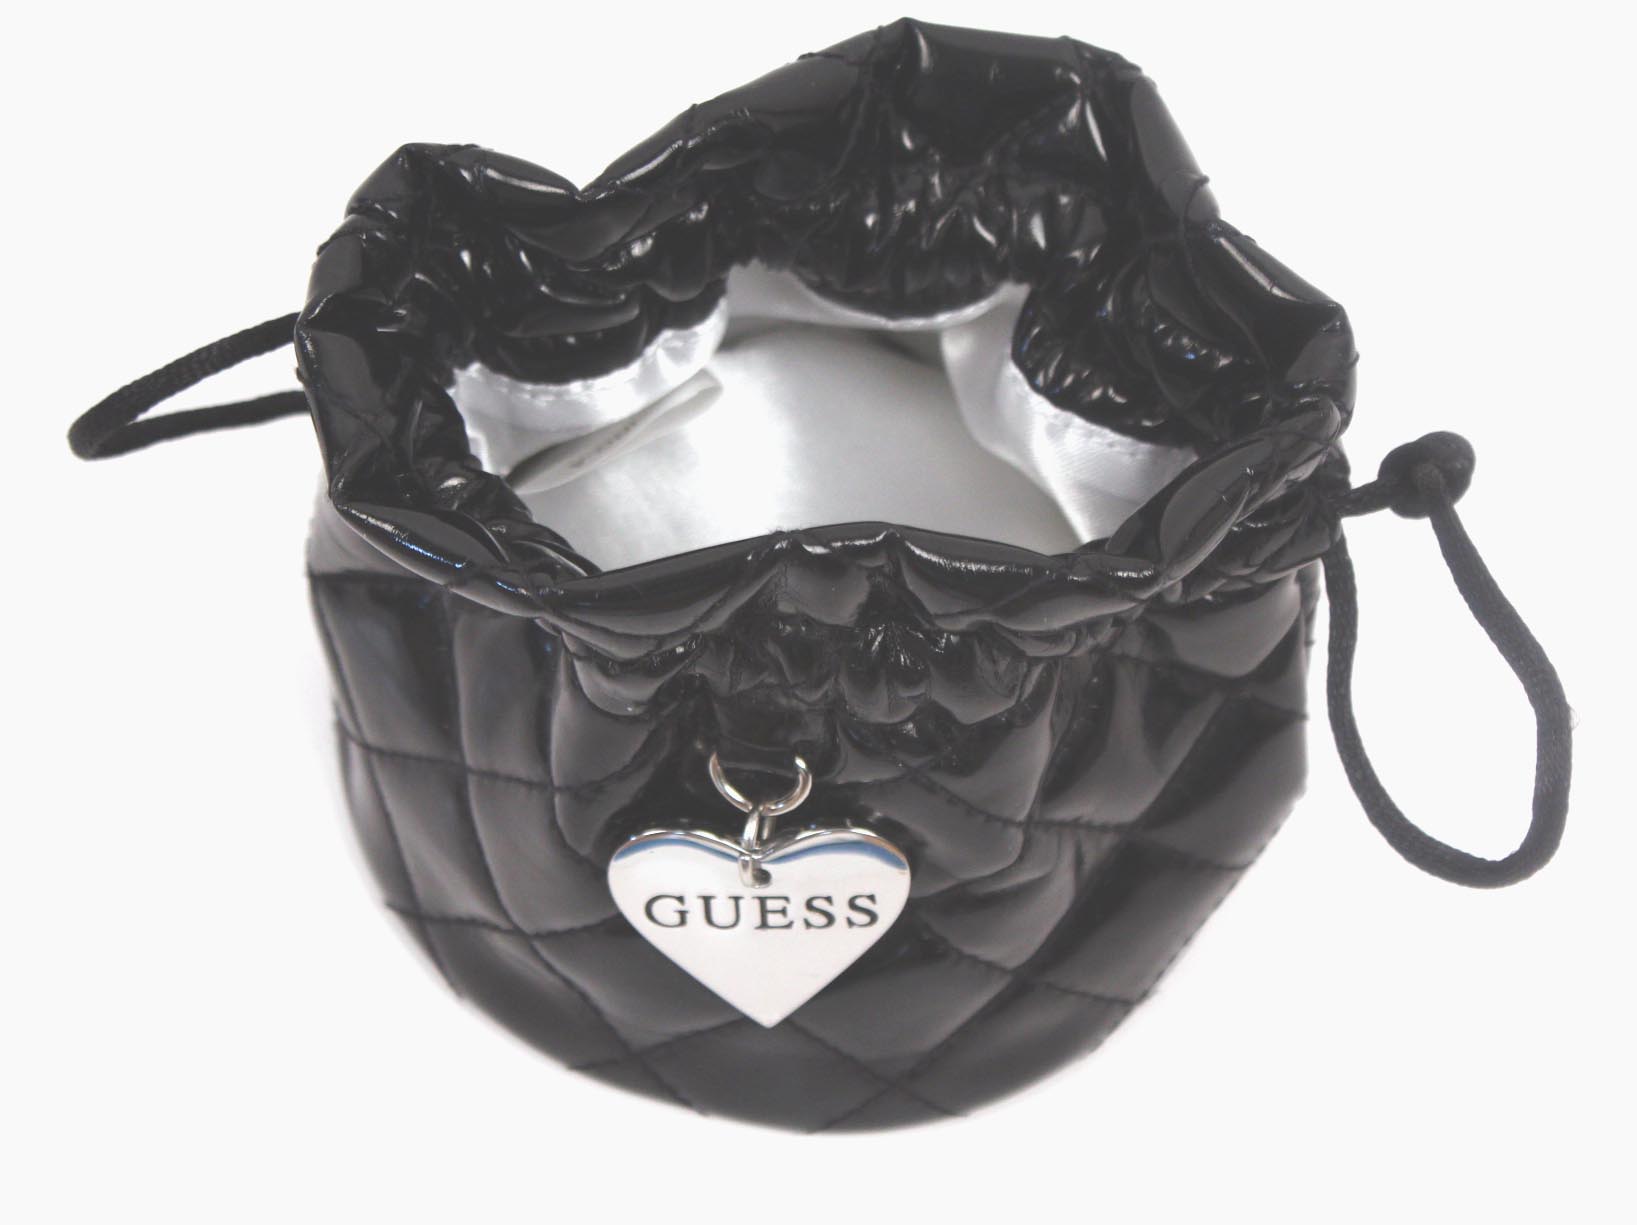 GUESS Vikky faux-leather convertible bag cosmetic pouch / purse BLACK -  AbuMaizar Dental Roots Clinic